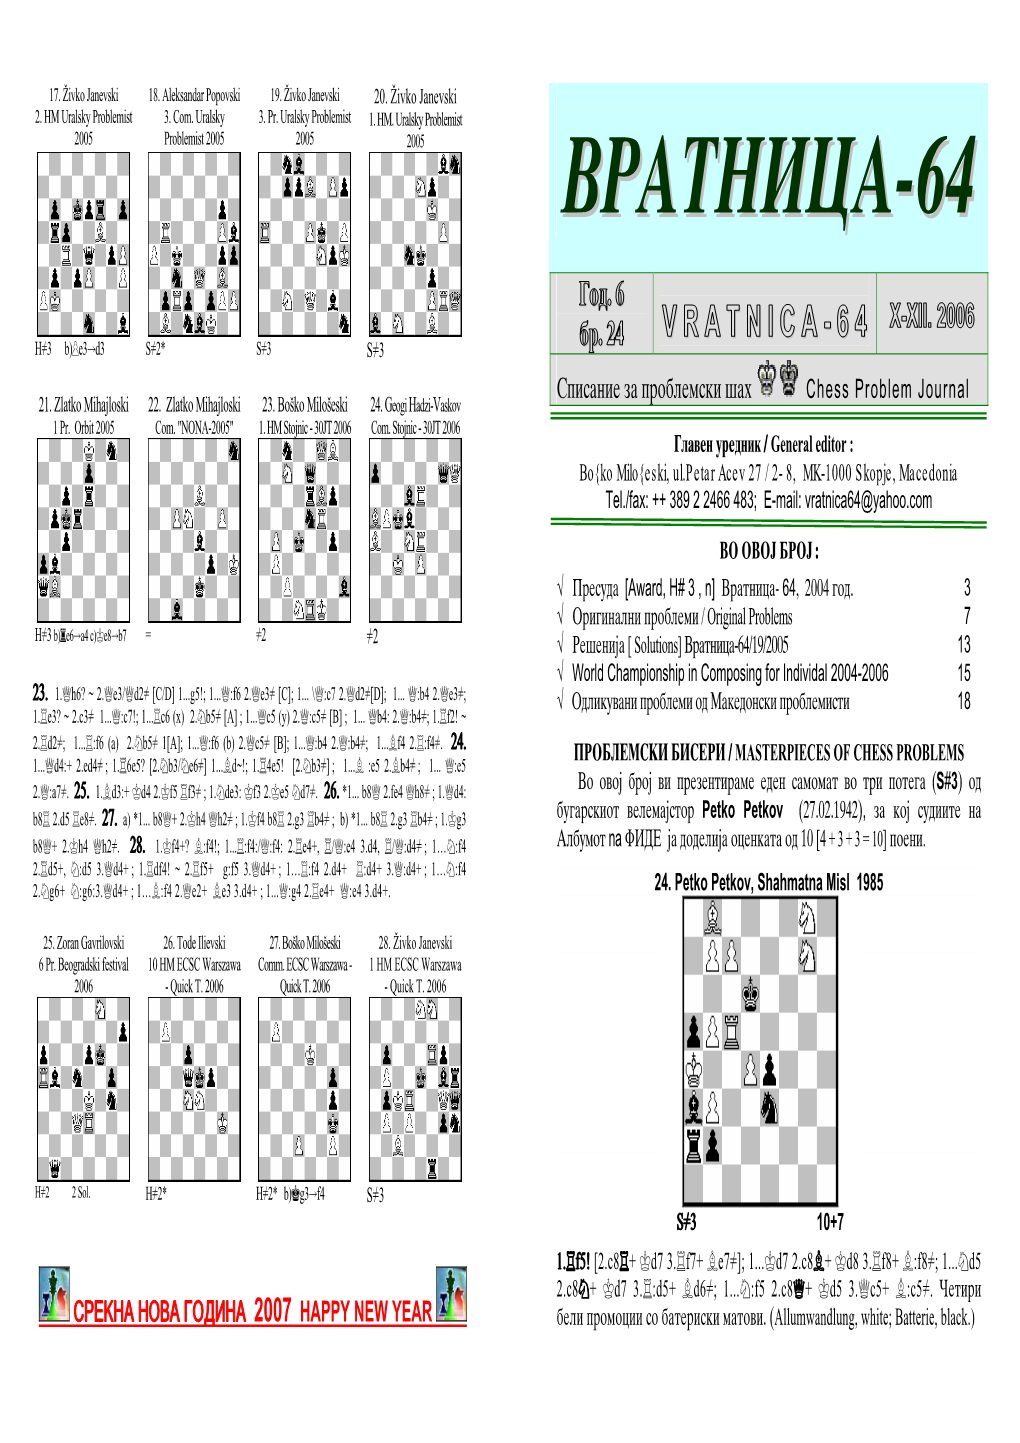 Vratnica-64/19/2005 13 √ World Championship in Composing for Individal 2004-2006 15 23